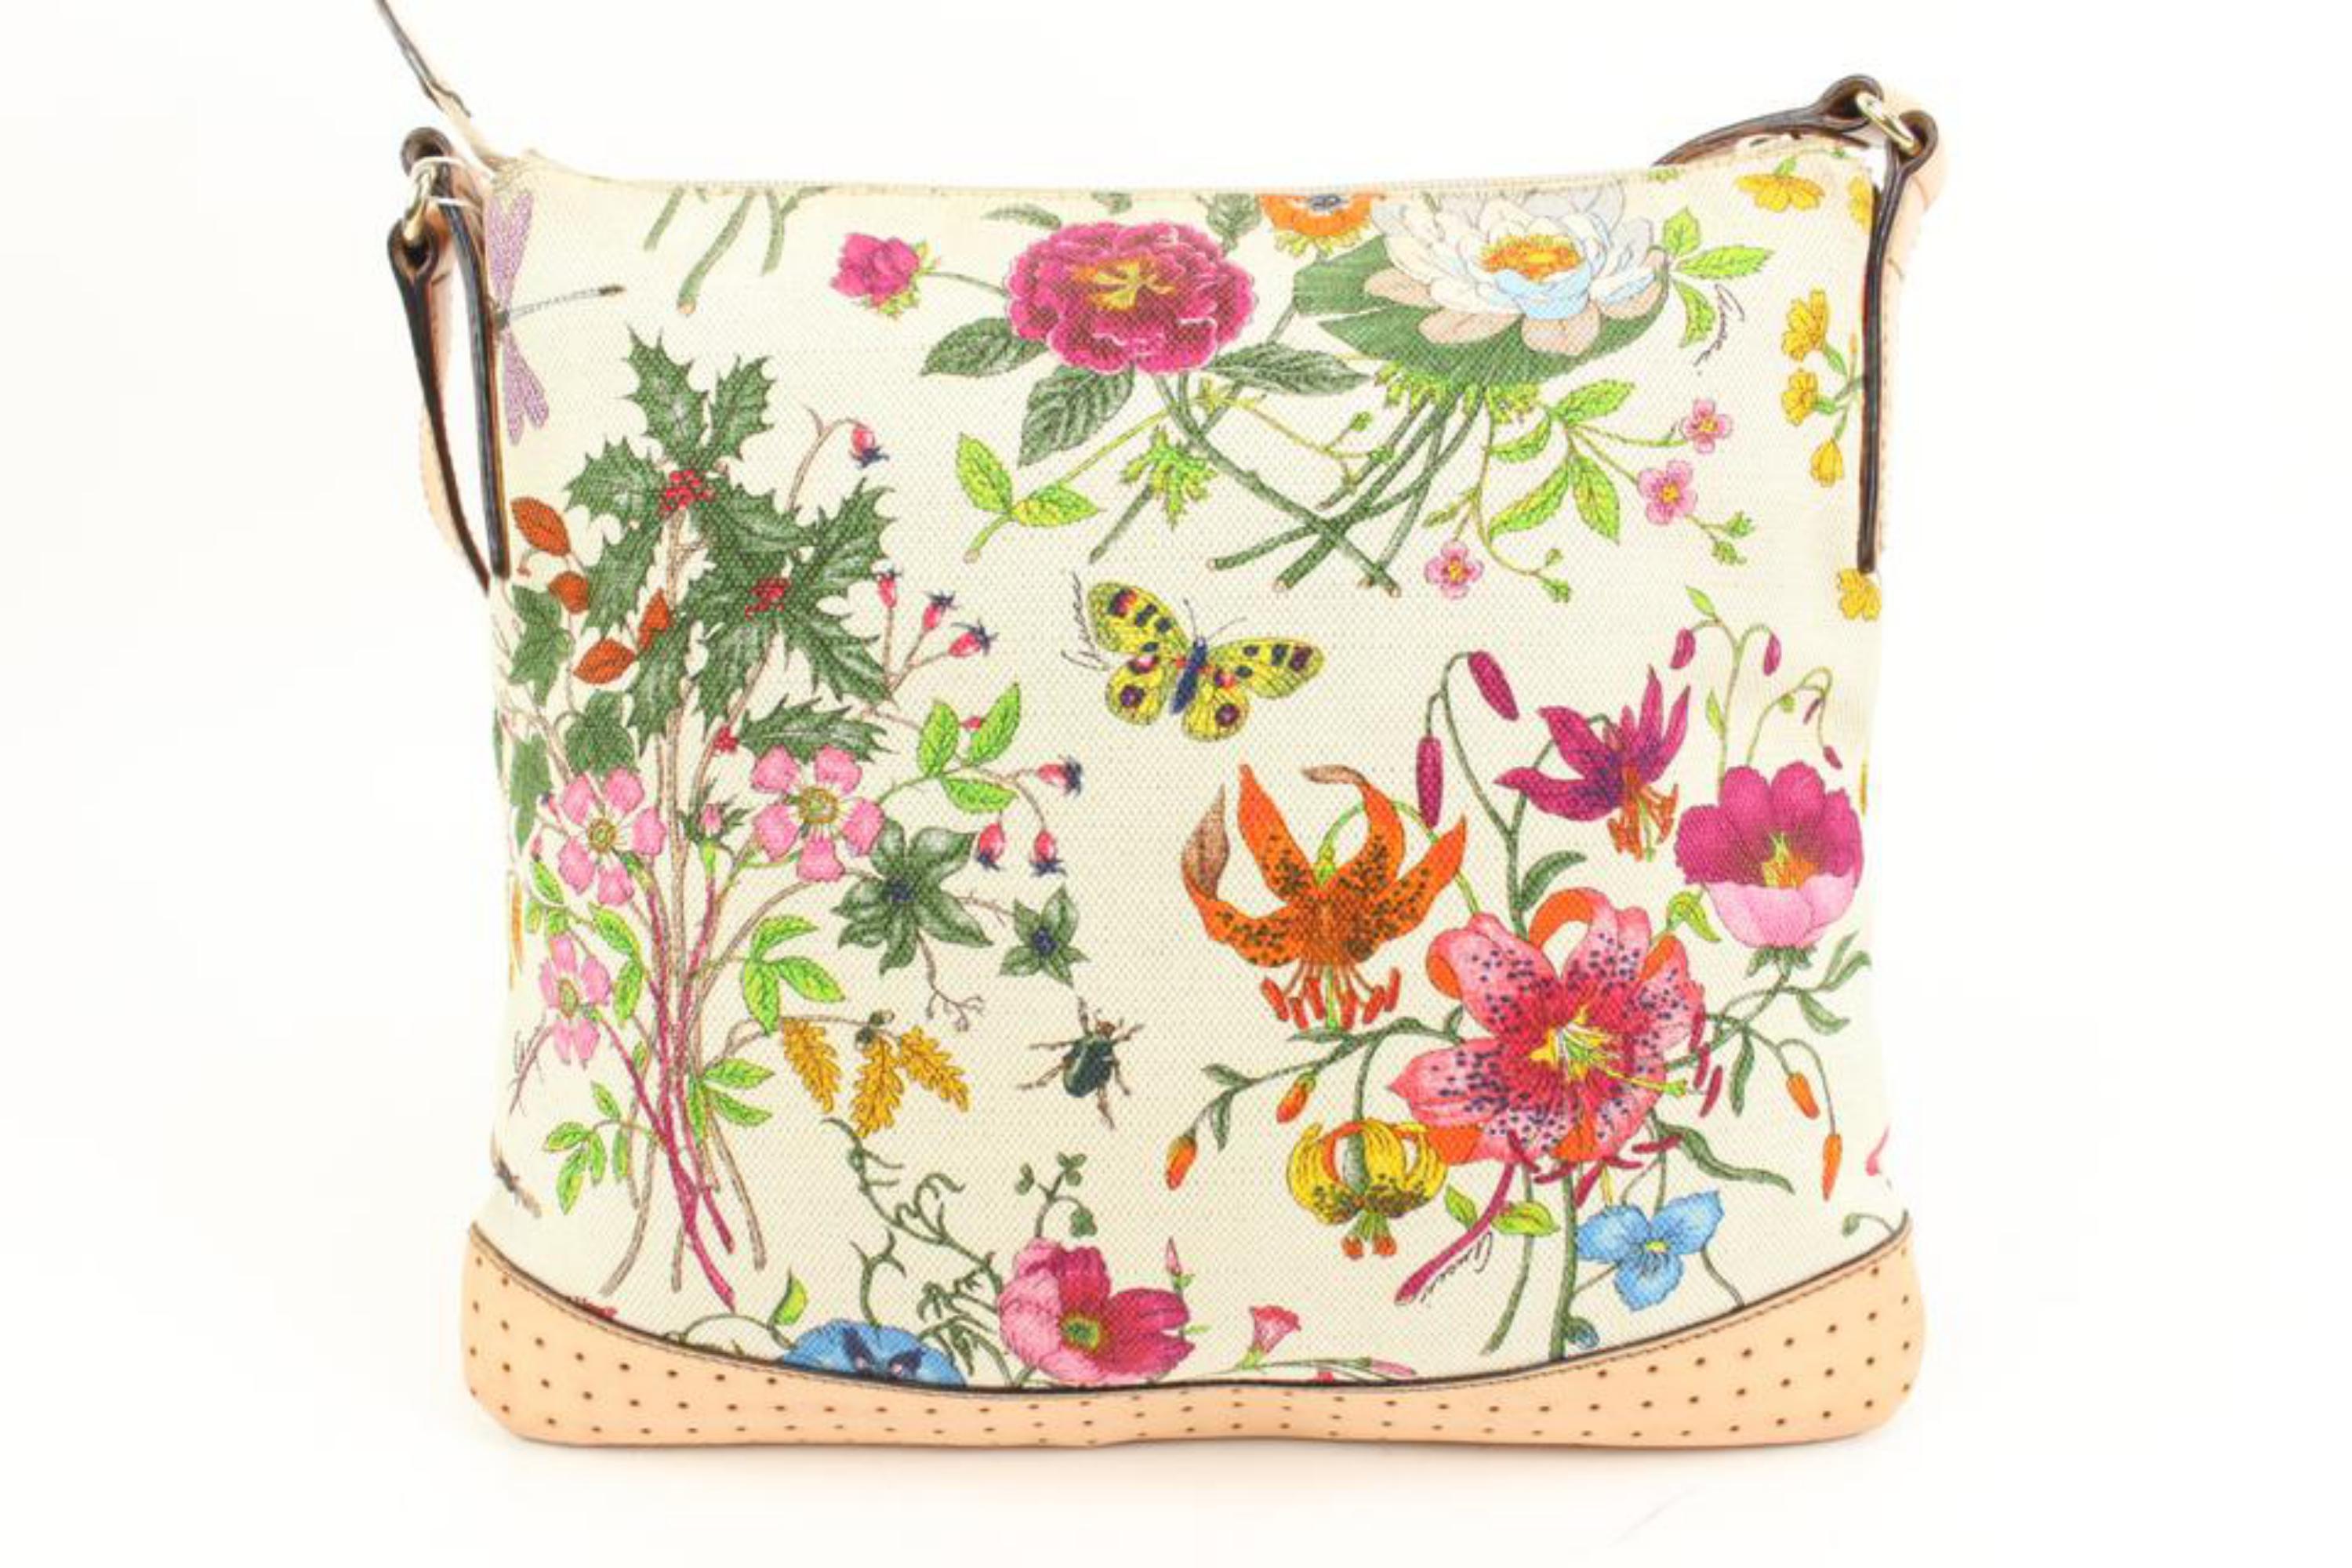 Women's Gucci Butterfly Floral Perforated Leather Messenger Crossbody 85g317s